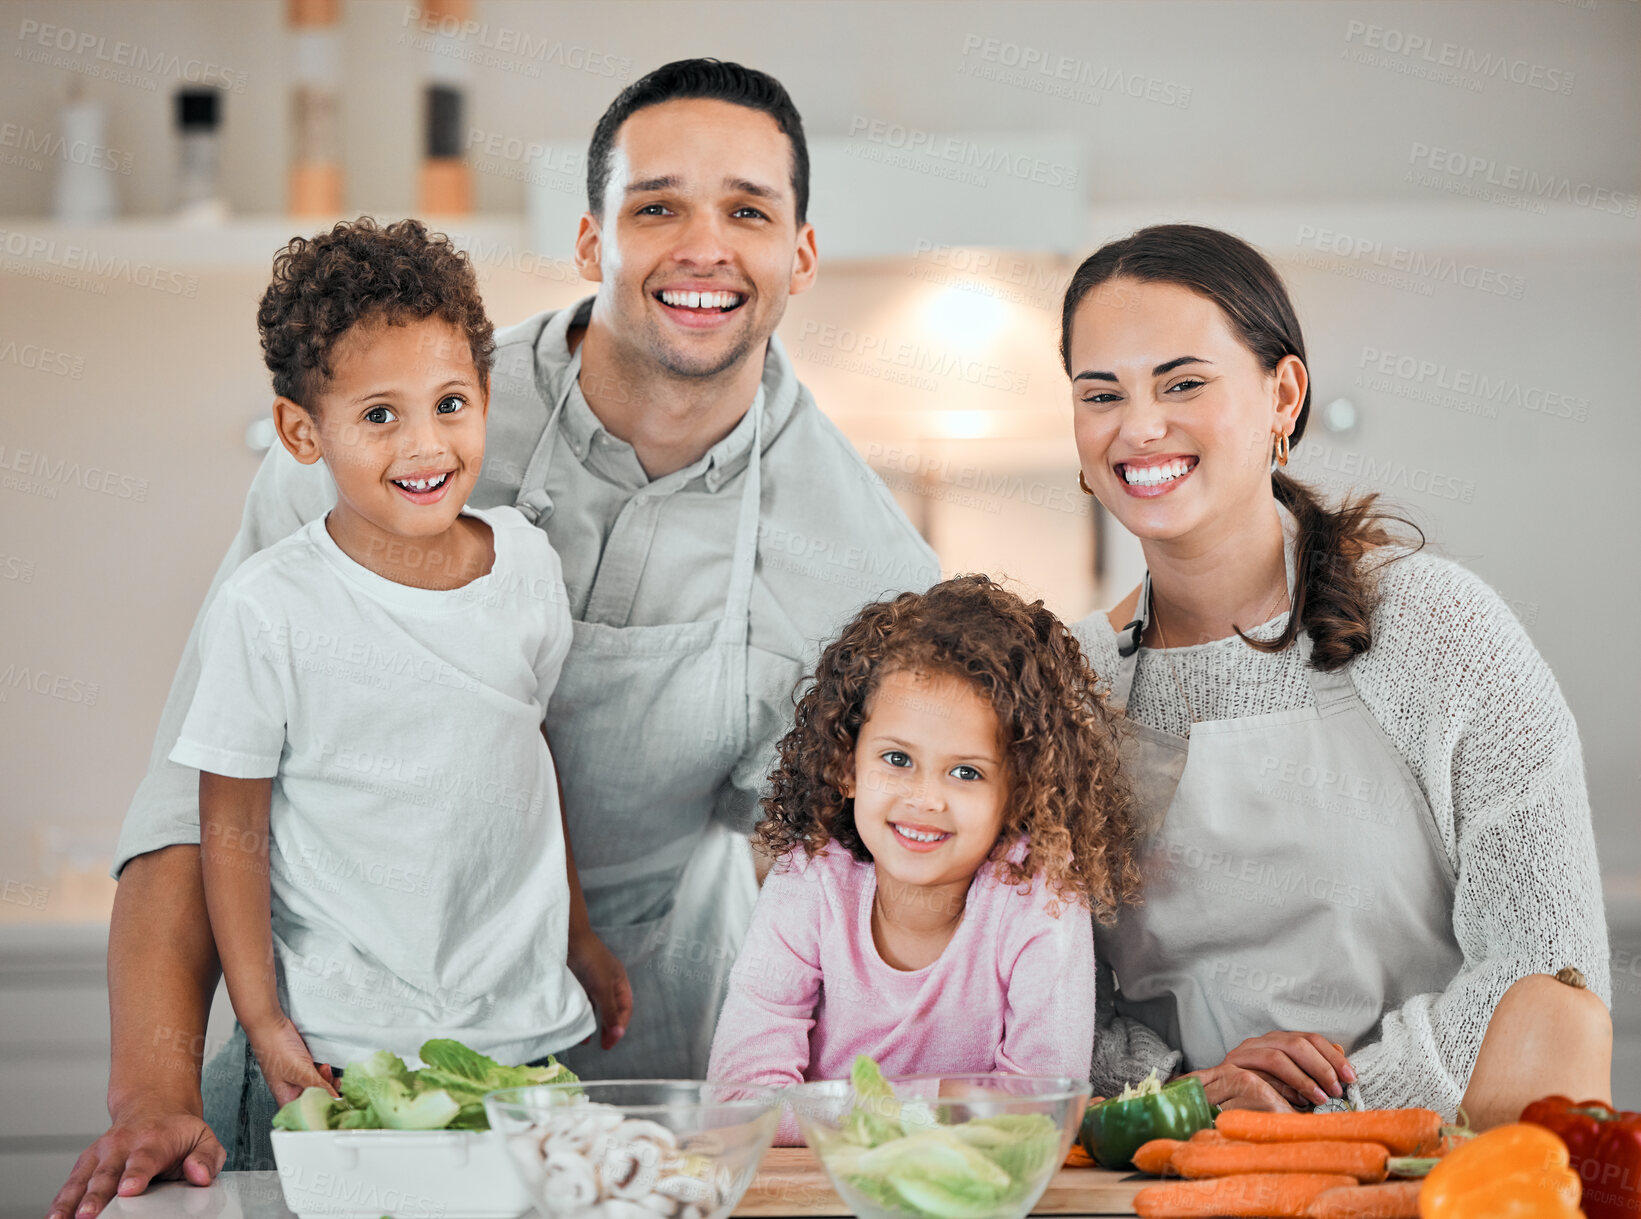 Buy stock photo Cooking, help and portrait of family in kitchen for health, nutrition and food. Diet, vegetables and dinner with parents and children with meal prep at home for wellness, organic salad and learning